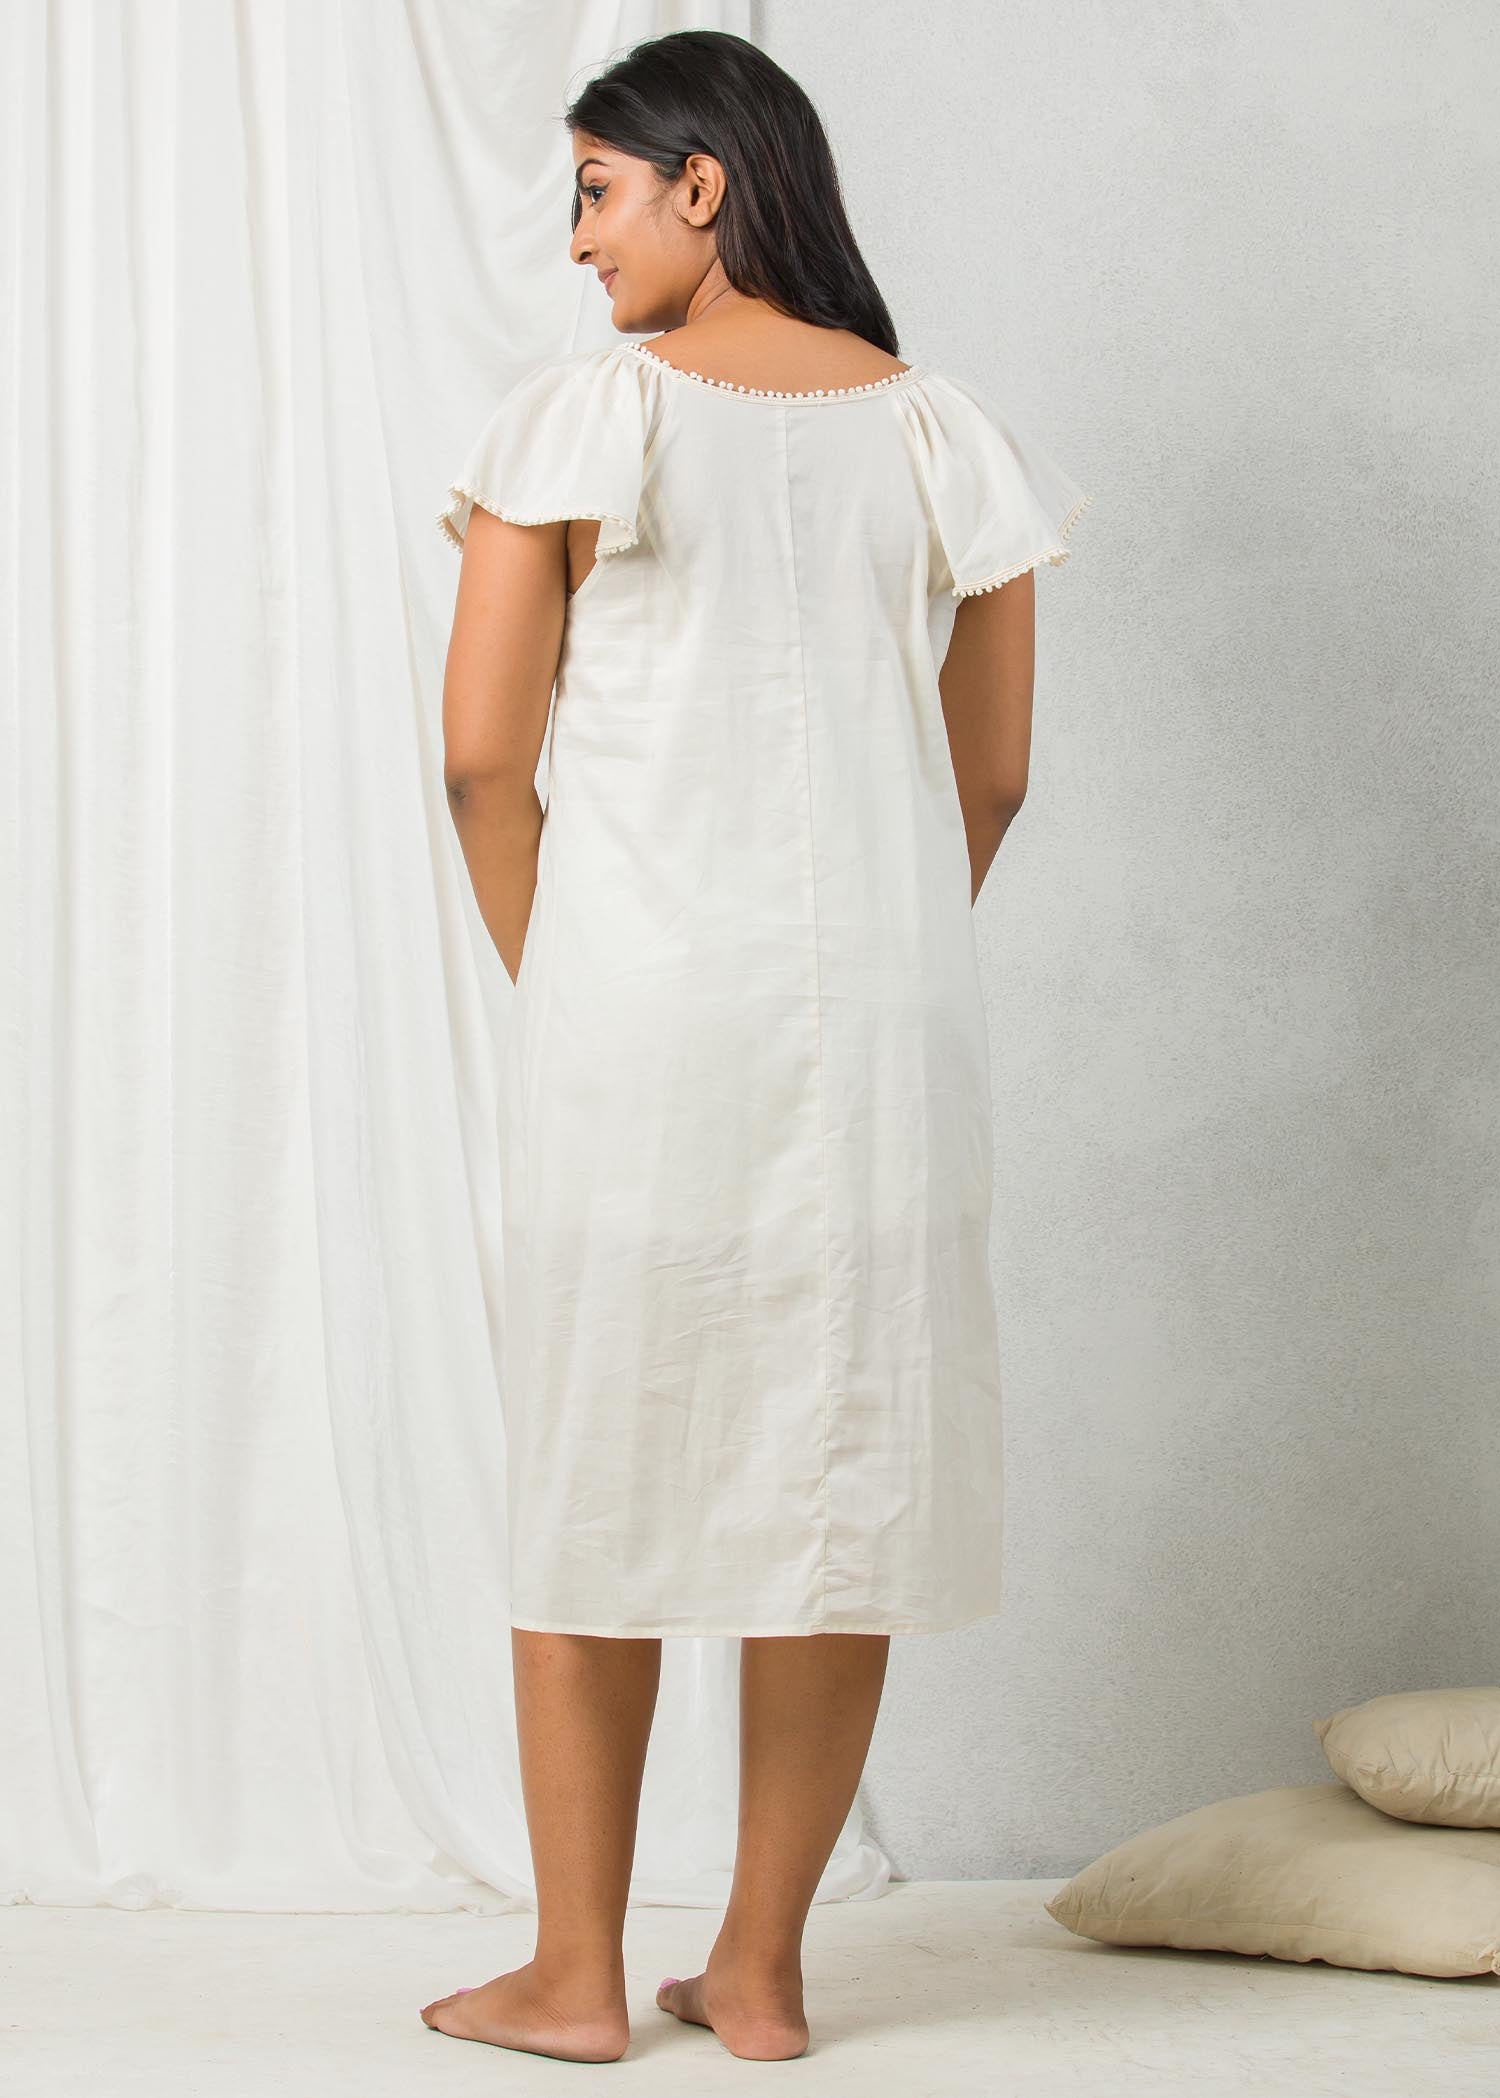 Nightgown with lace detail